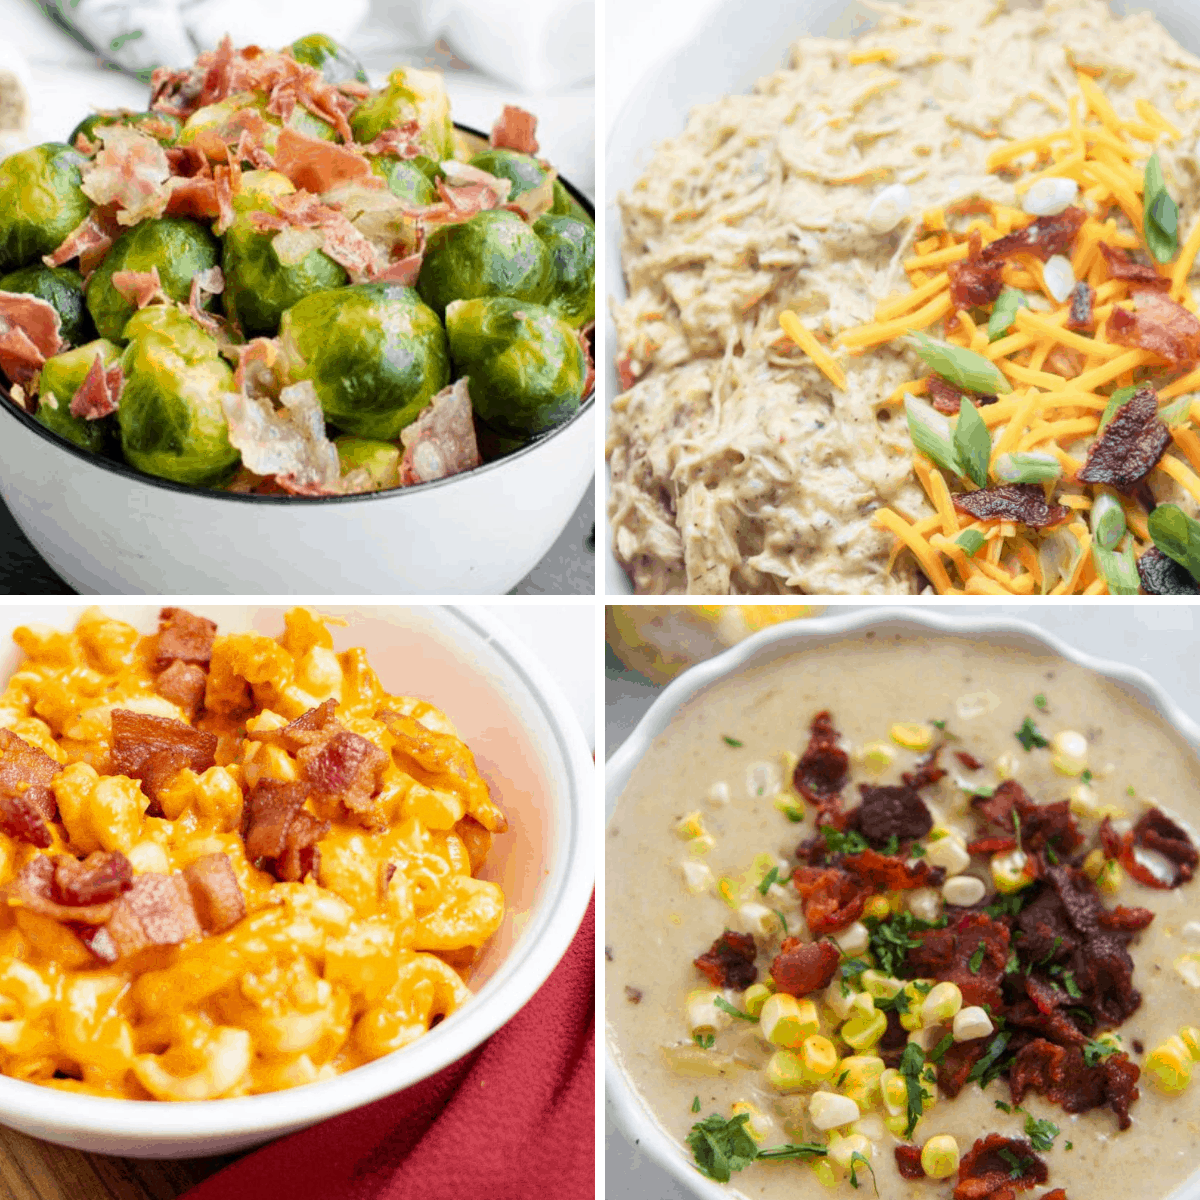 Four images in a grid: brussels sprouts with bacon bits, creamy shredded chicken with bacon bits, pumpkin mac and cheese with bacon bits, and bacon corn chowder.